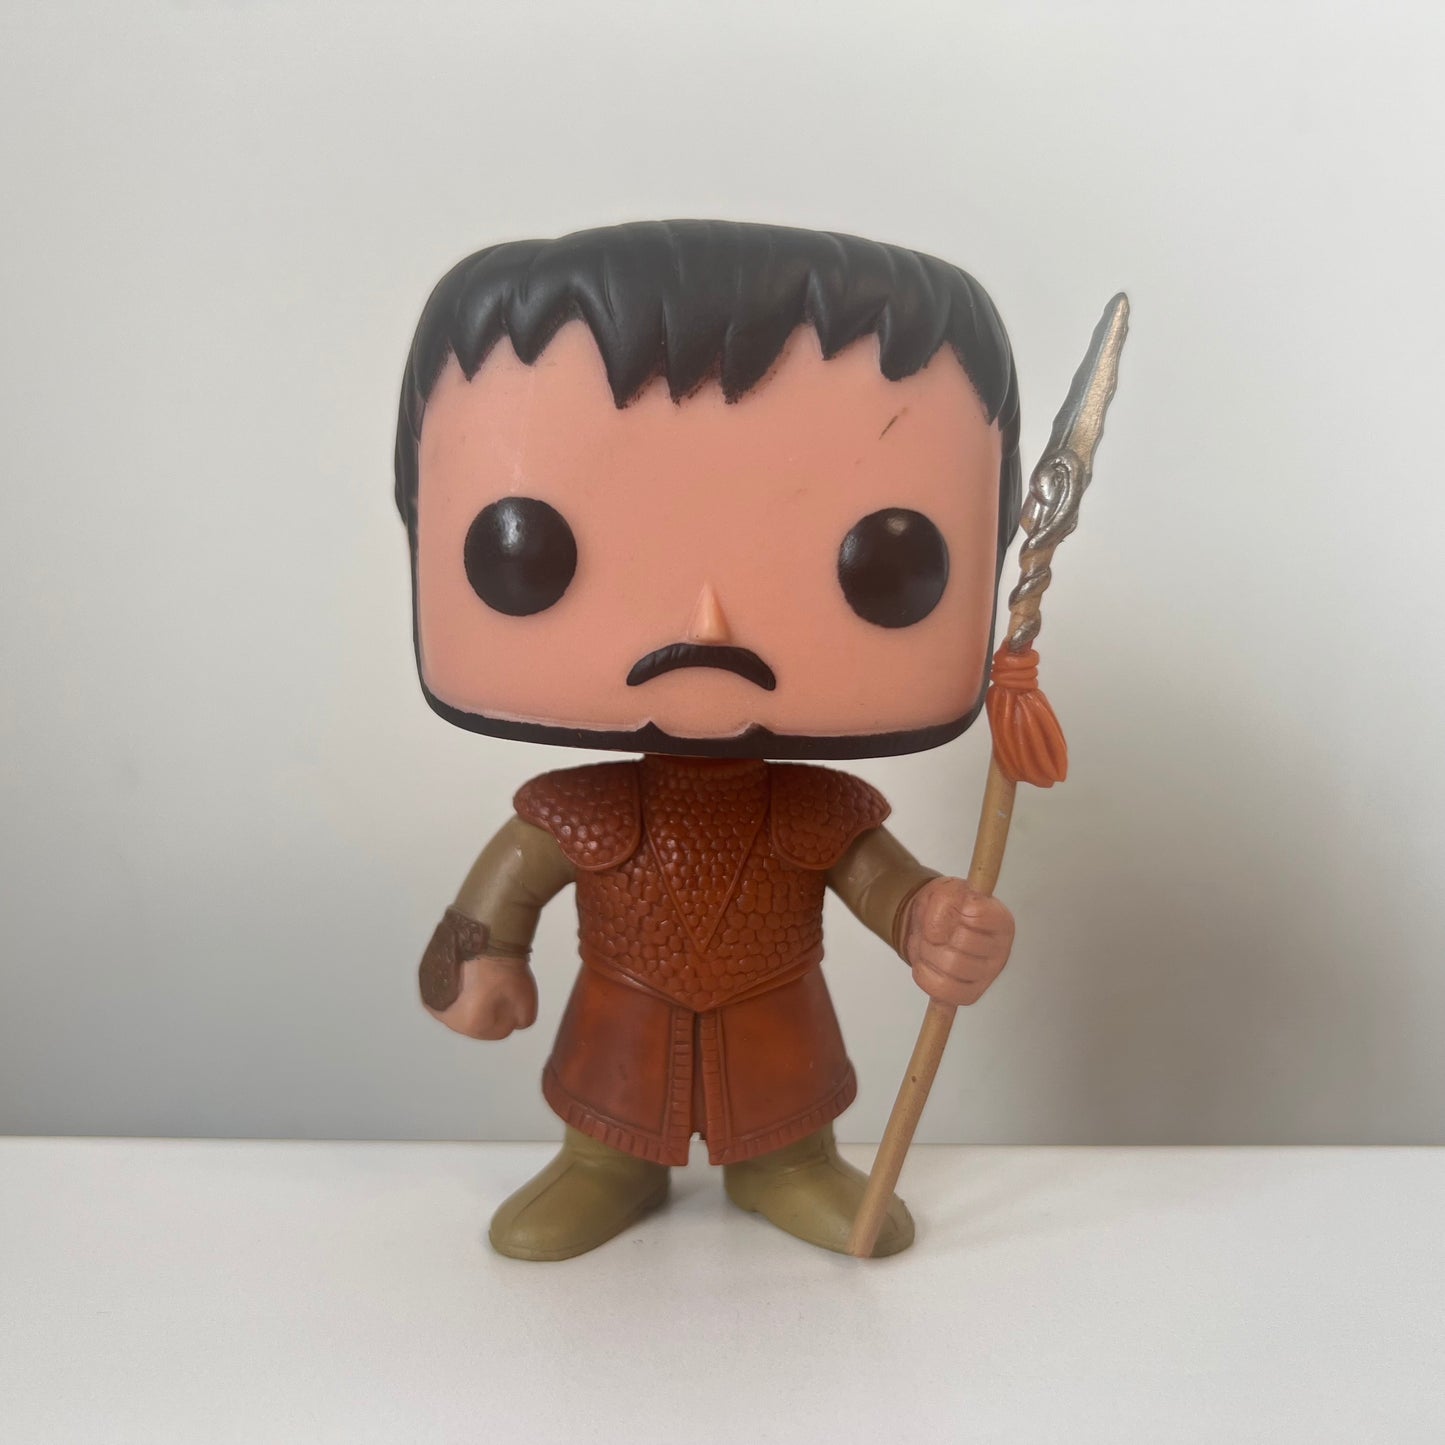 Game of Thrones - Oberyn Martell 30 Funko Pop (No Box or Insert Included)